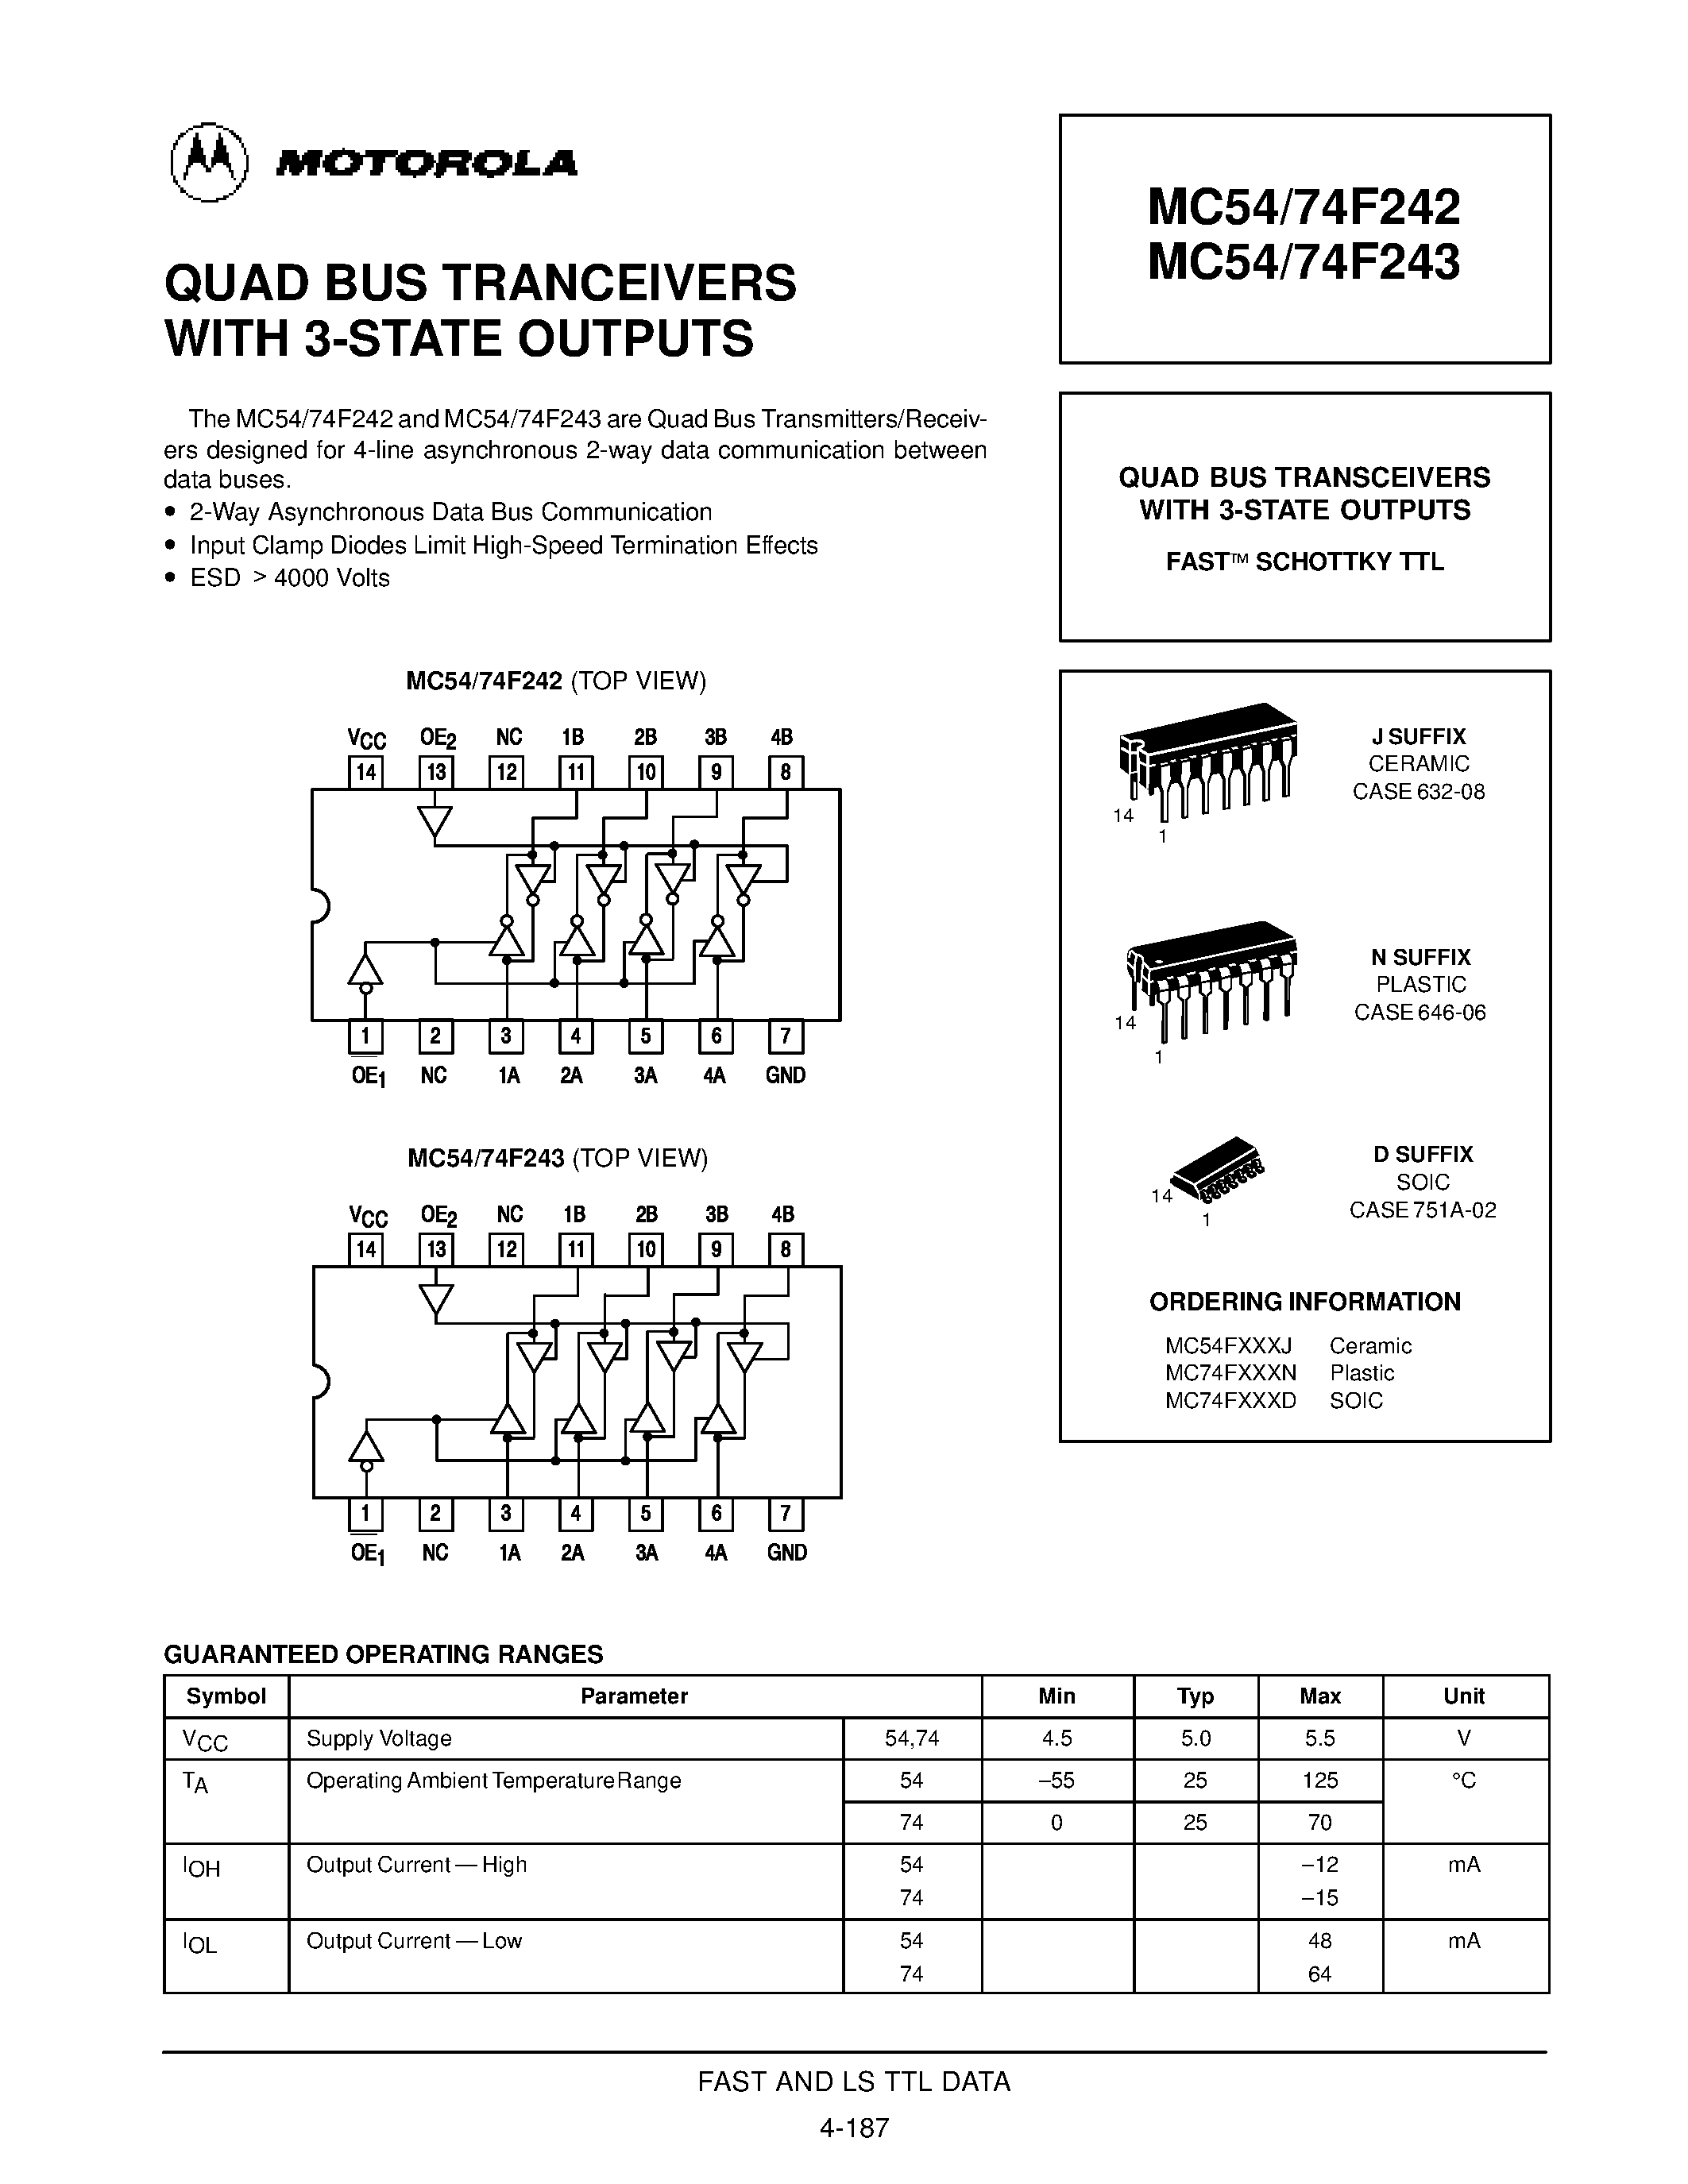 Datasheet MC74F242 - (MC74F242 / MC74F243) QUAD BUS TRANSCEIVERS WITH 3-STATE OUTPUTS FAST SCHOTTKY TTL page 1